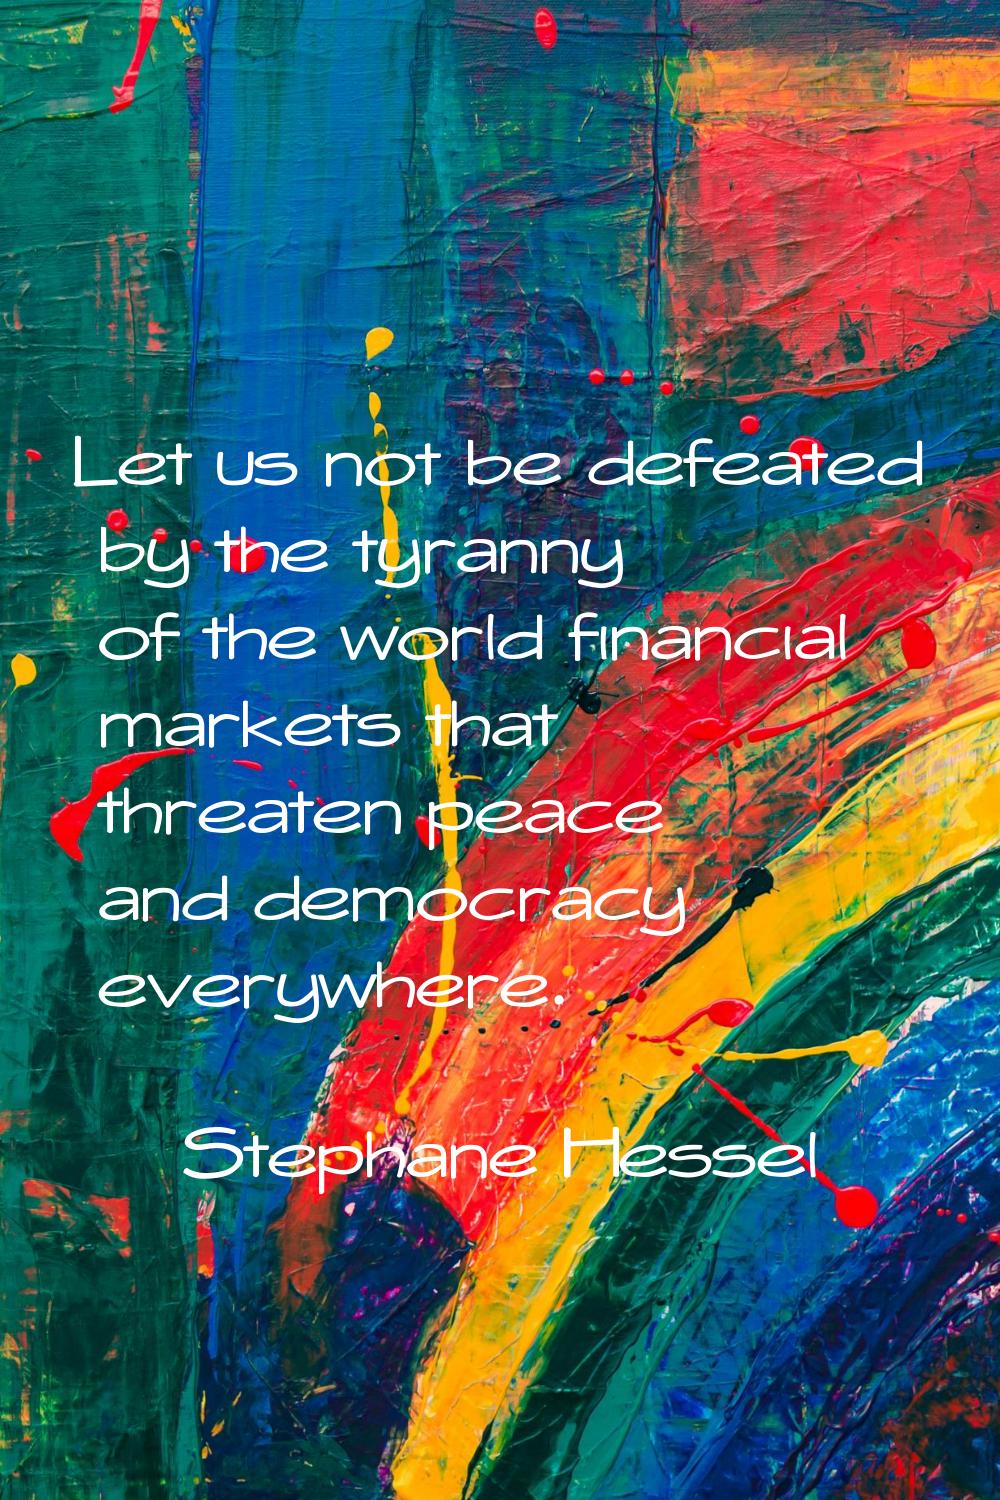 Let us not be defeated by the tyranny of the world financial markets that threaten peace and democr